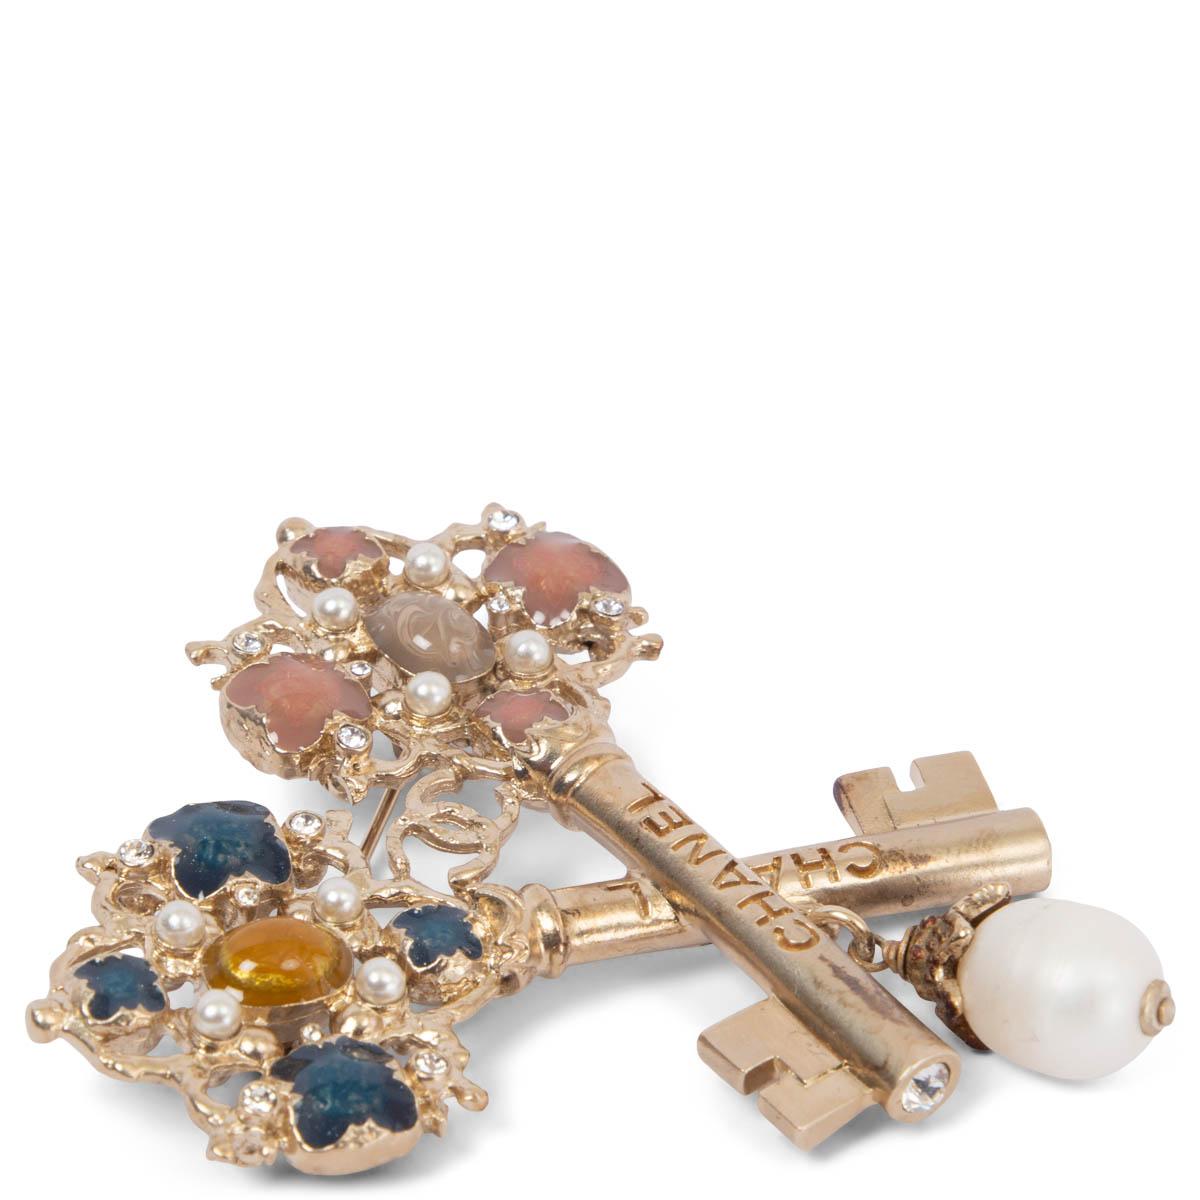 100% authentic Chanel 2017 Metiers d'Art Cosmopolite keys brooch in light gold-tone metal embellished with, blue, nude, taupe and beige stones a dangling faux pearl, small faux pearls and rhinestones. Has been worn and is in excellent condition.